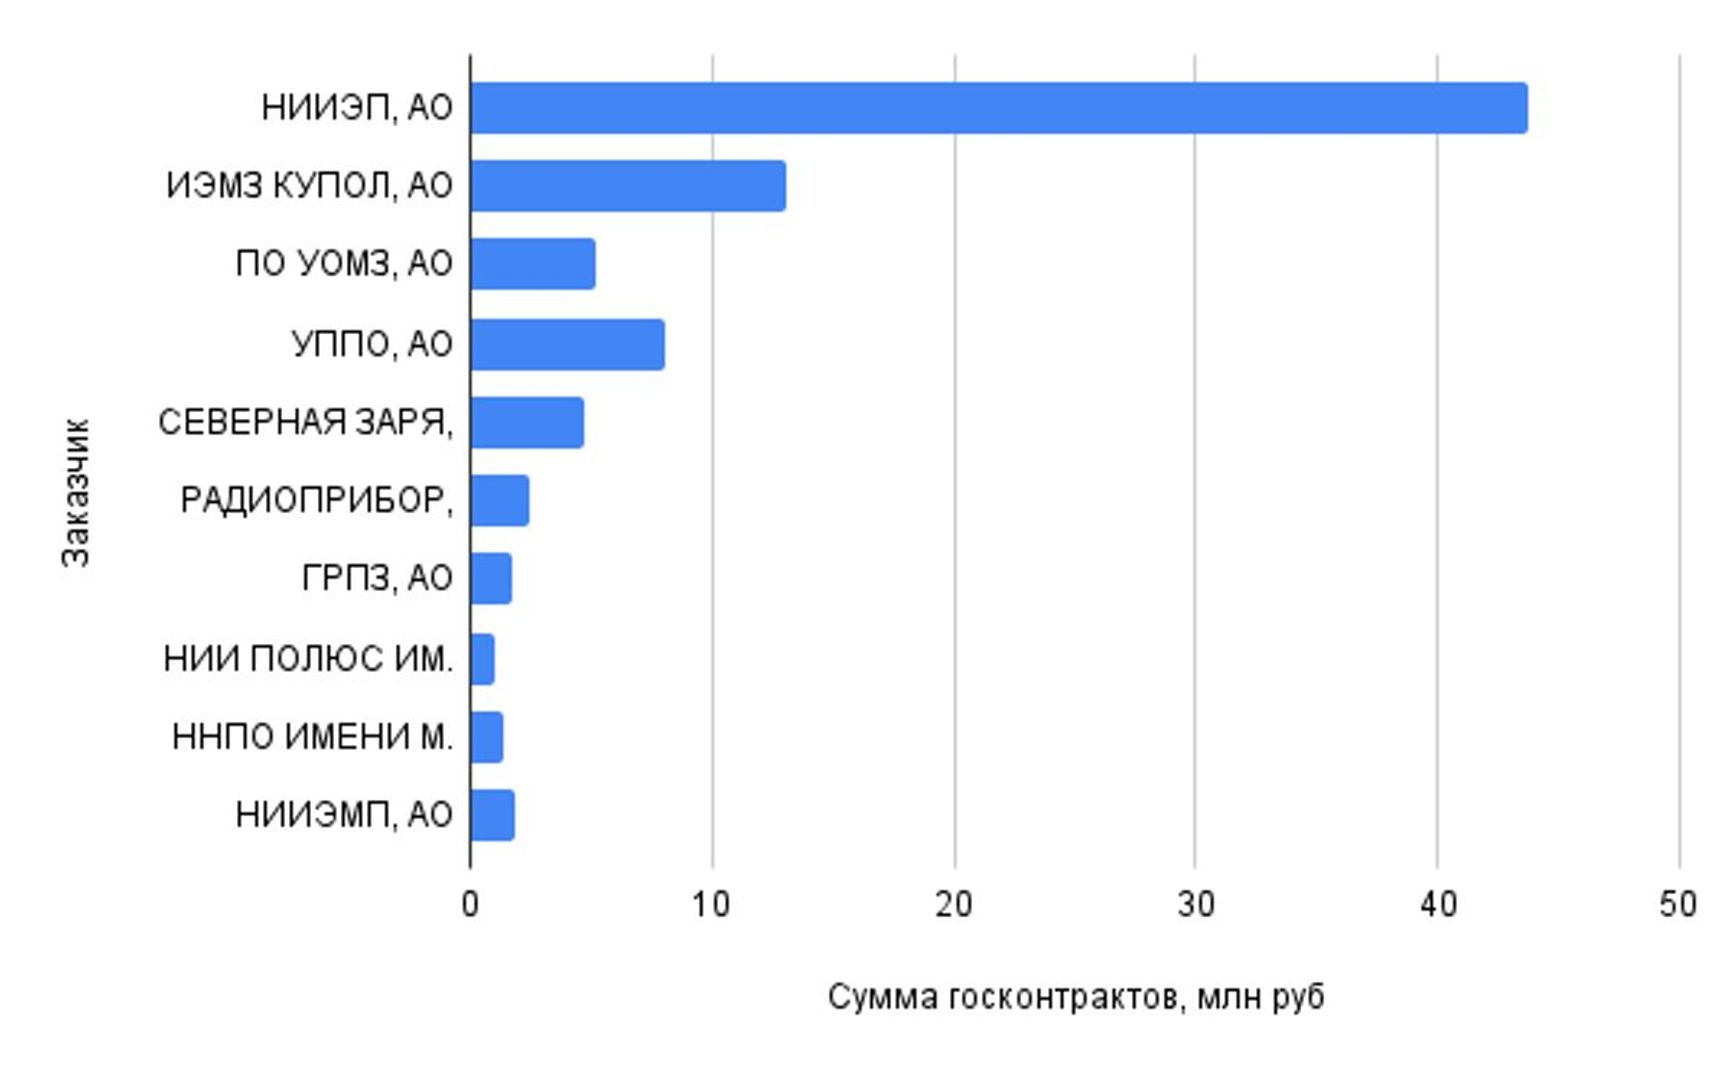 Lesta-M's main state-owned customers: NIIEP tops the chart with contracts worth 40+ million roubles, with IEMZ Kupol (10+ million roubles) coming in second.